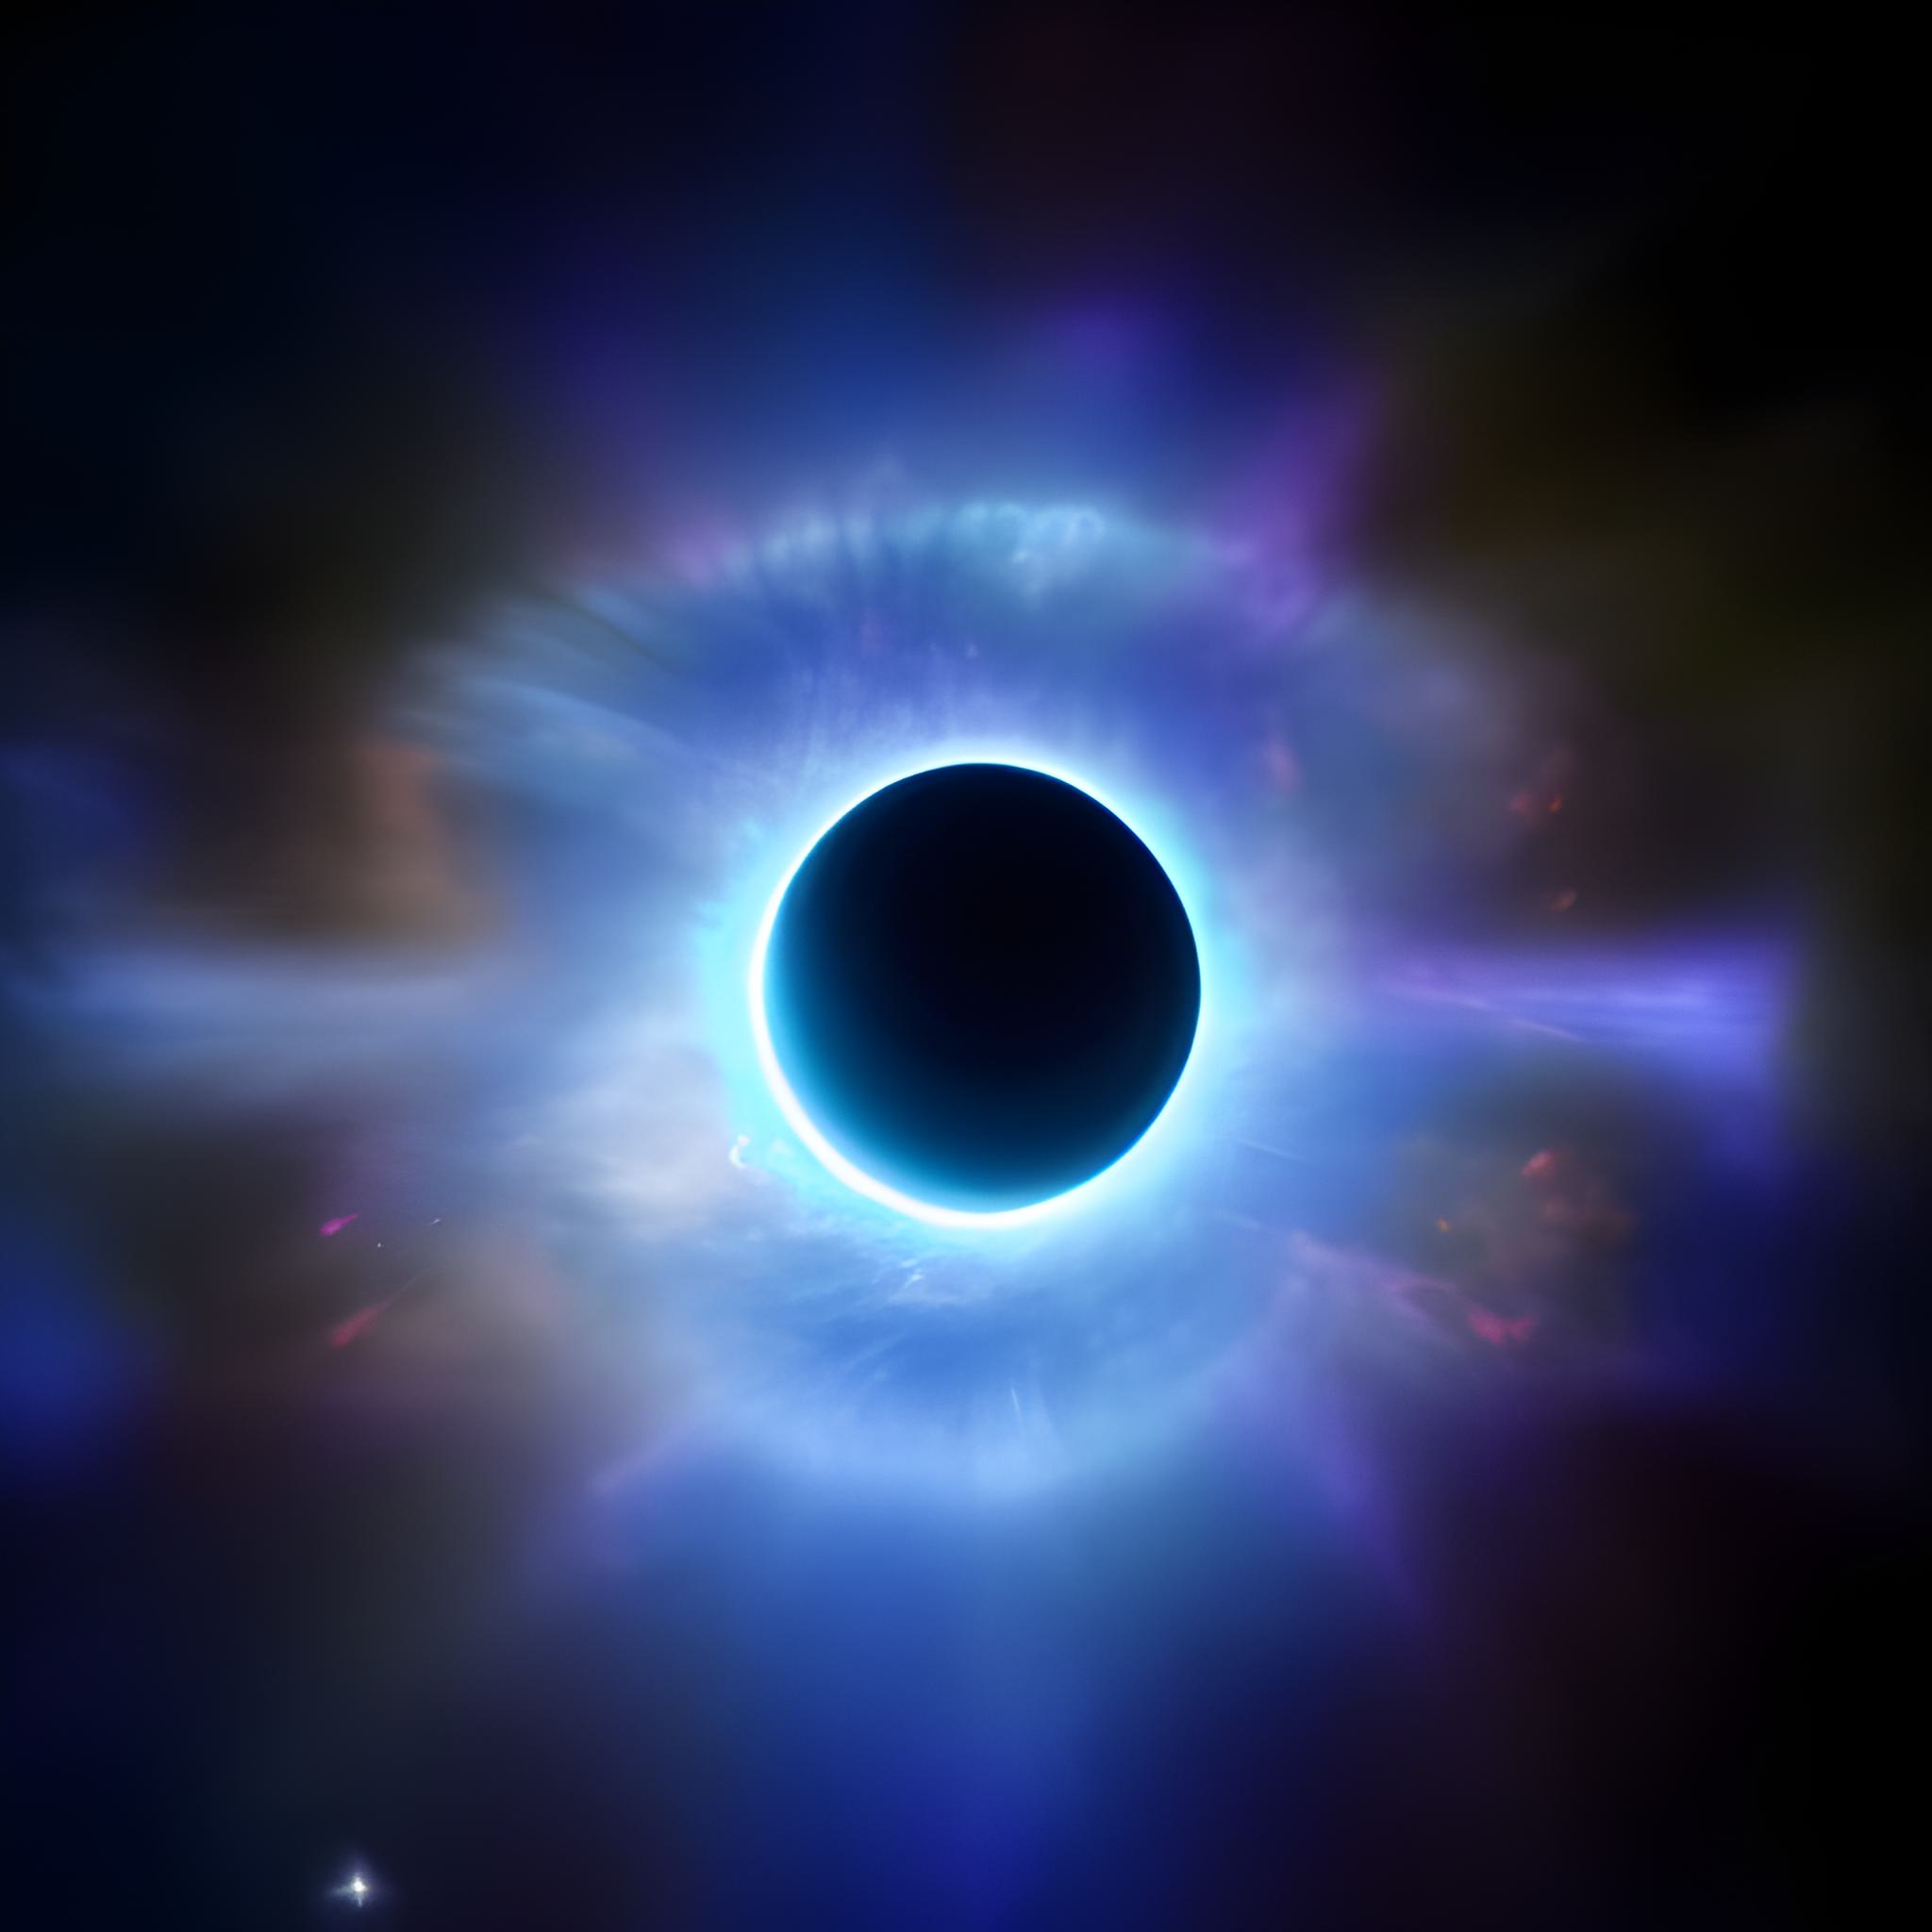 Image in space showing a big black mass in the center sourrounded by a white halo.